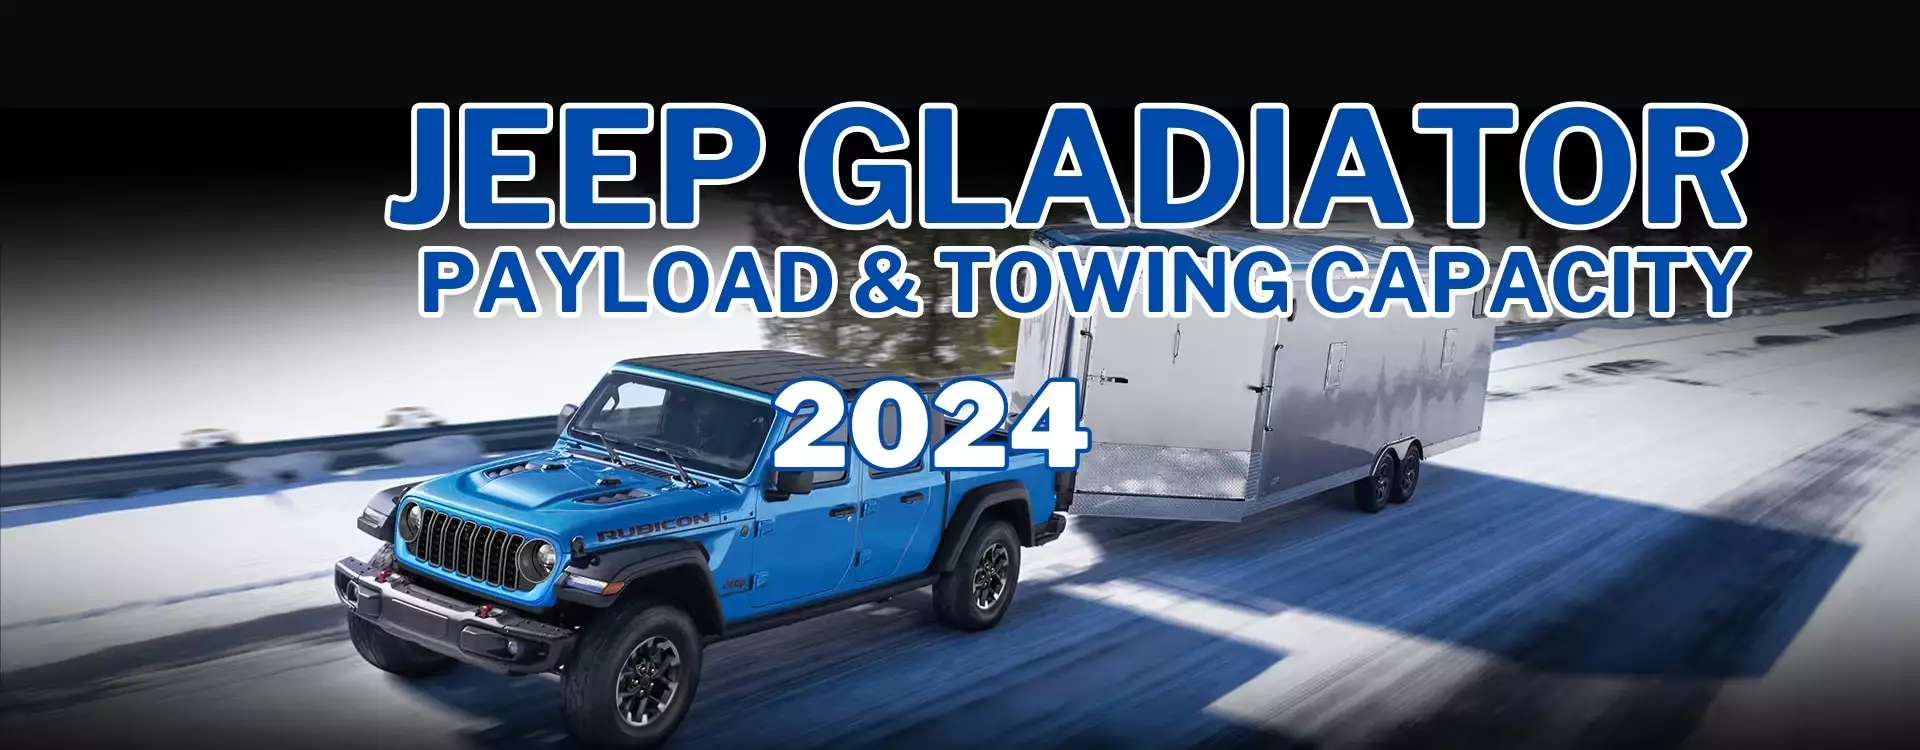 2024 jeep gladiator towing capacity